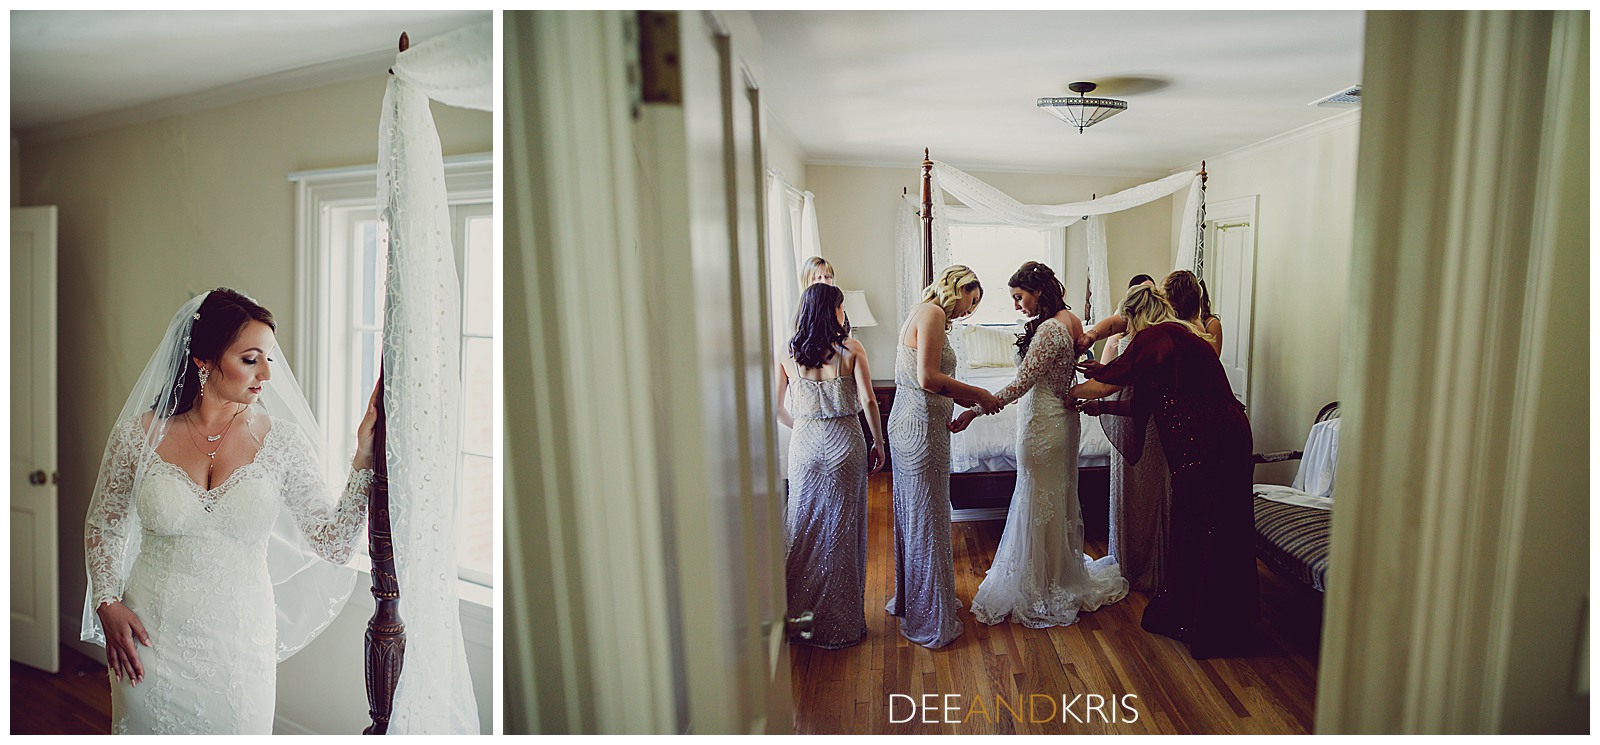 Monte Verde Inn Photos in Bridal suite, bride getting ready, dee and kris photography